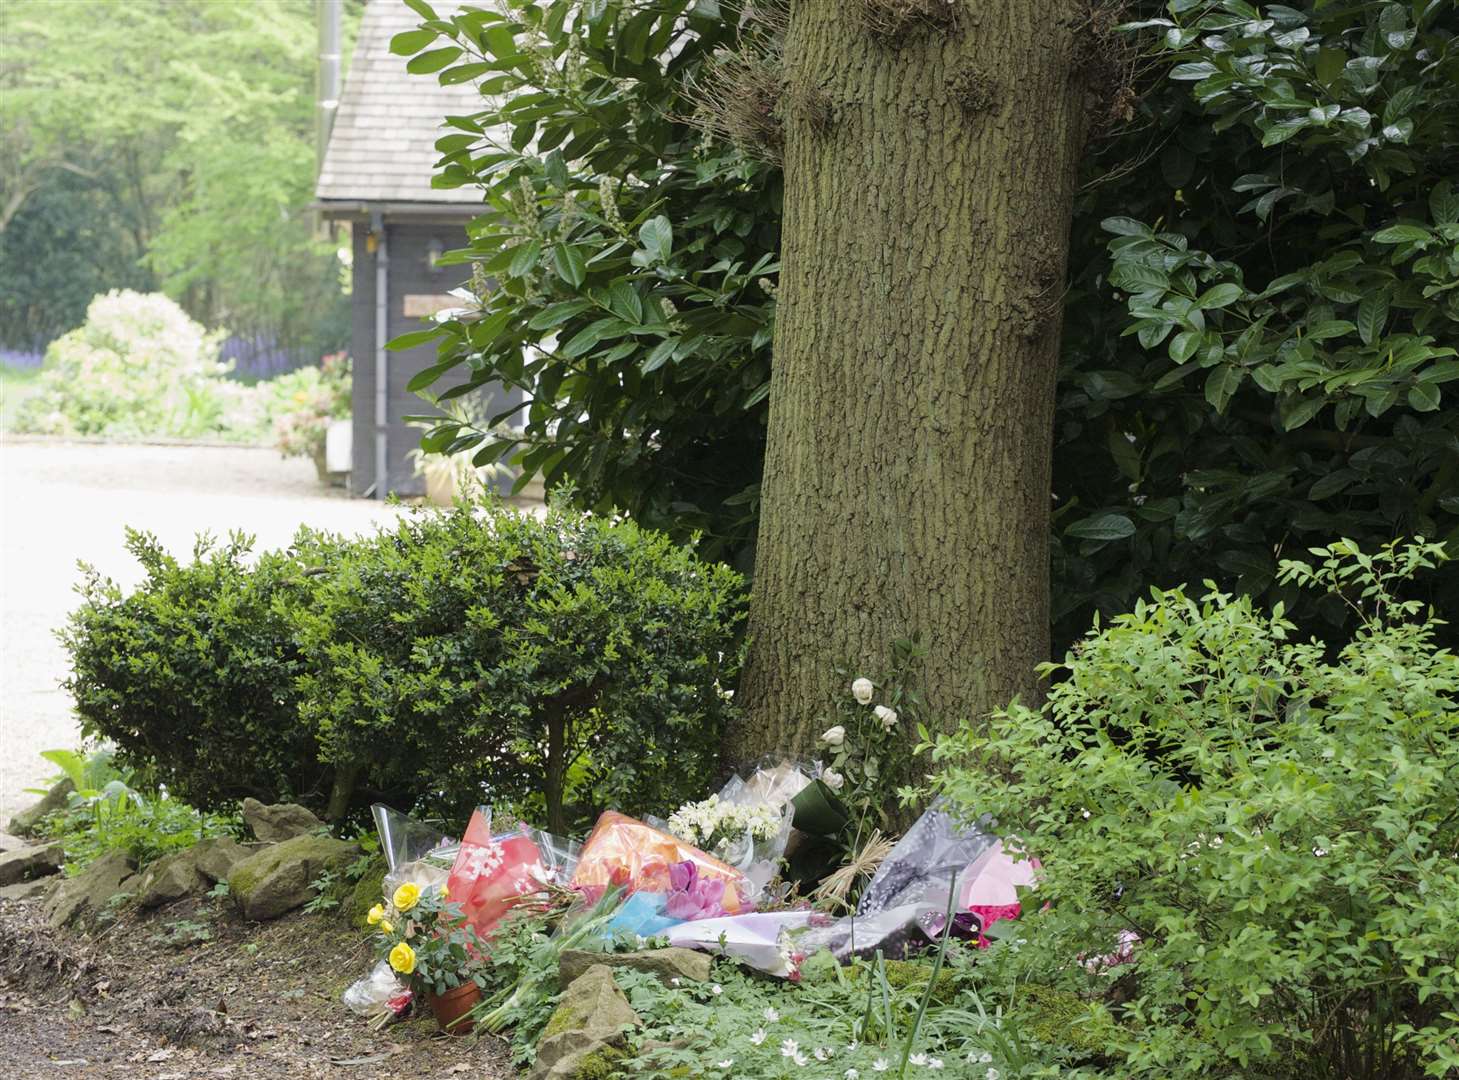 Floral tributes at the home of Peaches Geldof in Wrotham following her death. Picture: Andy Payton